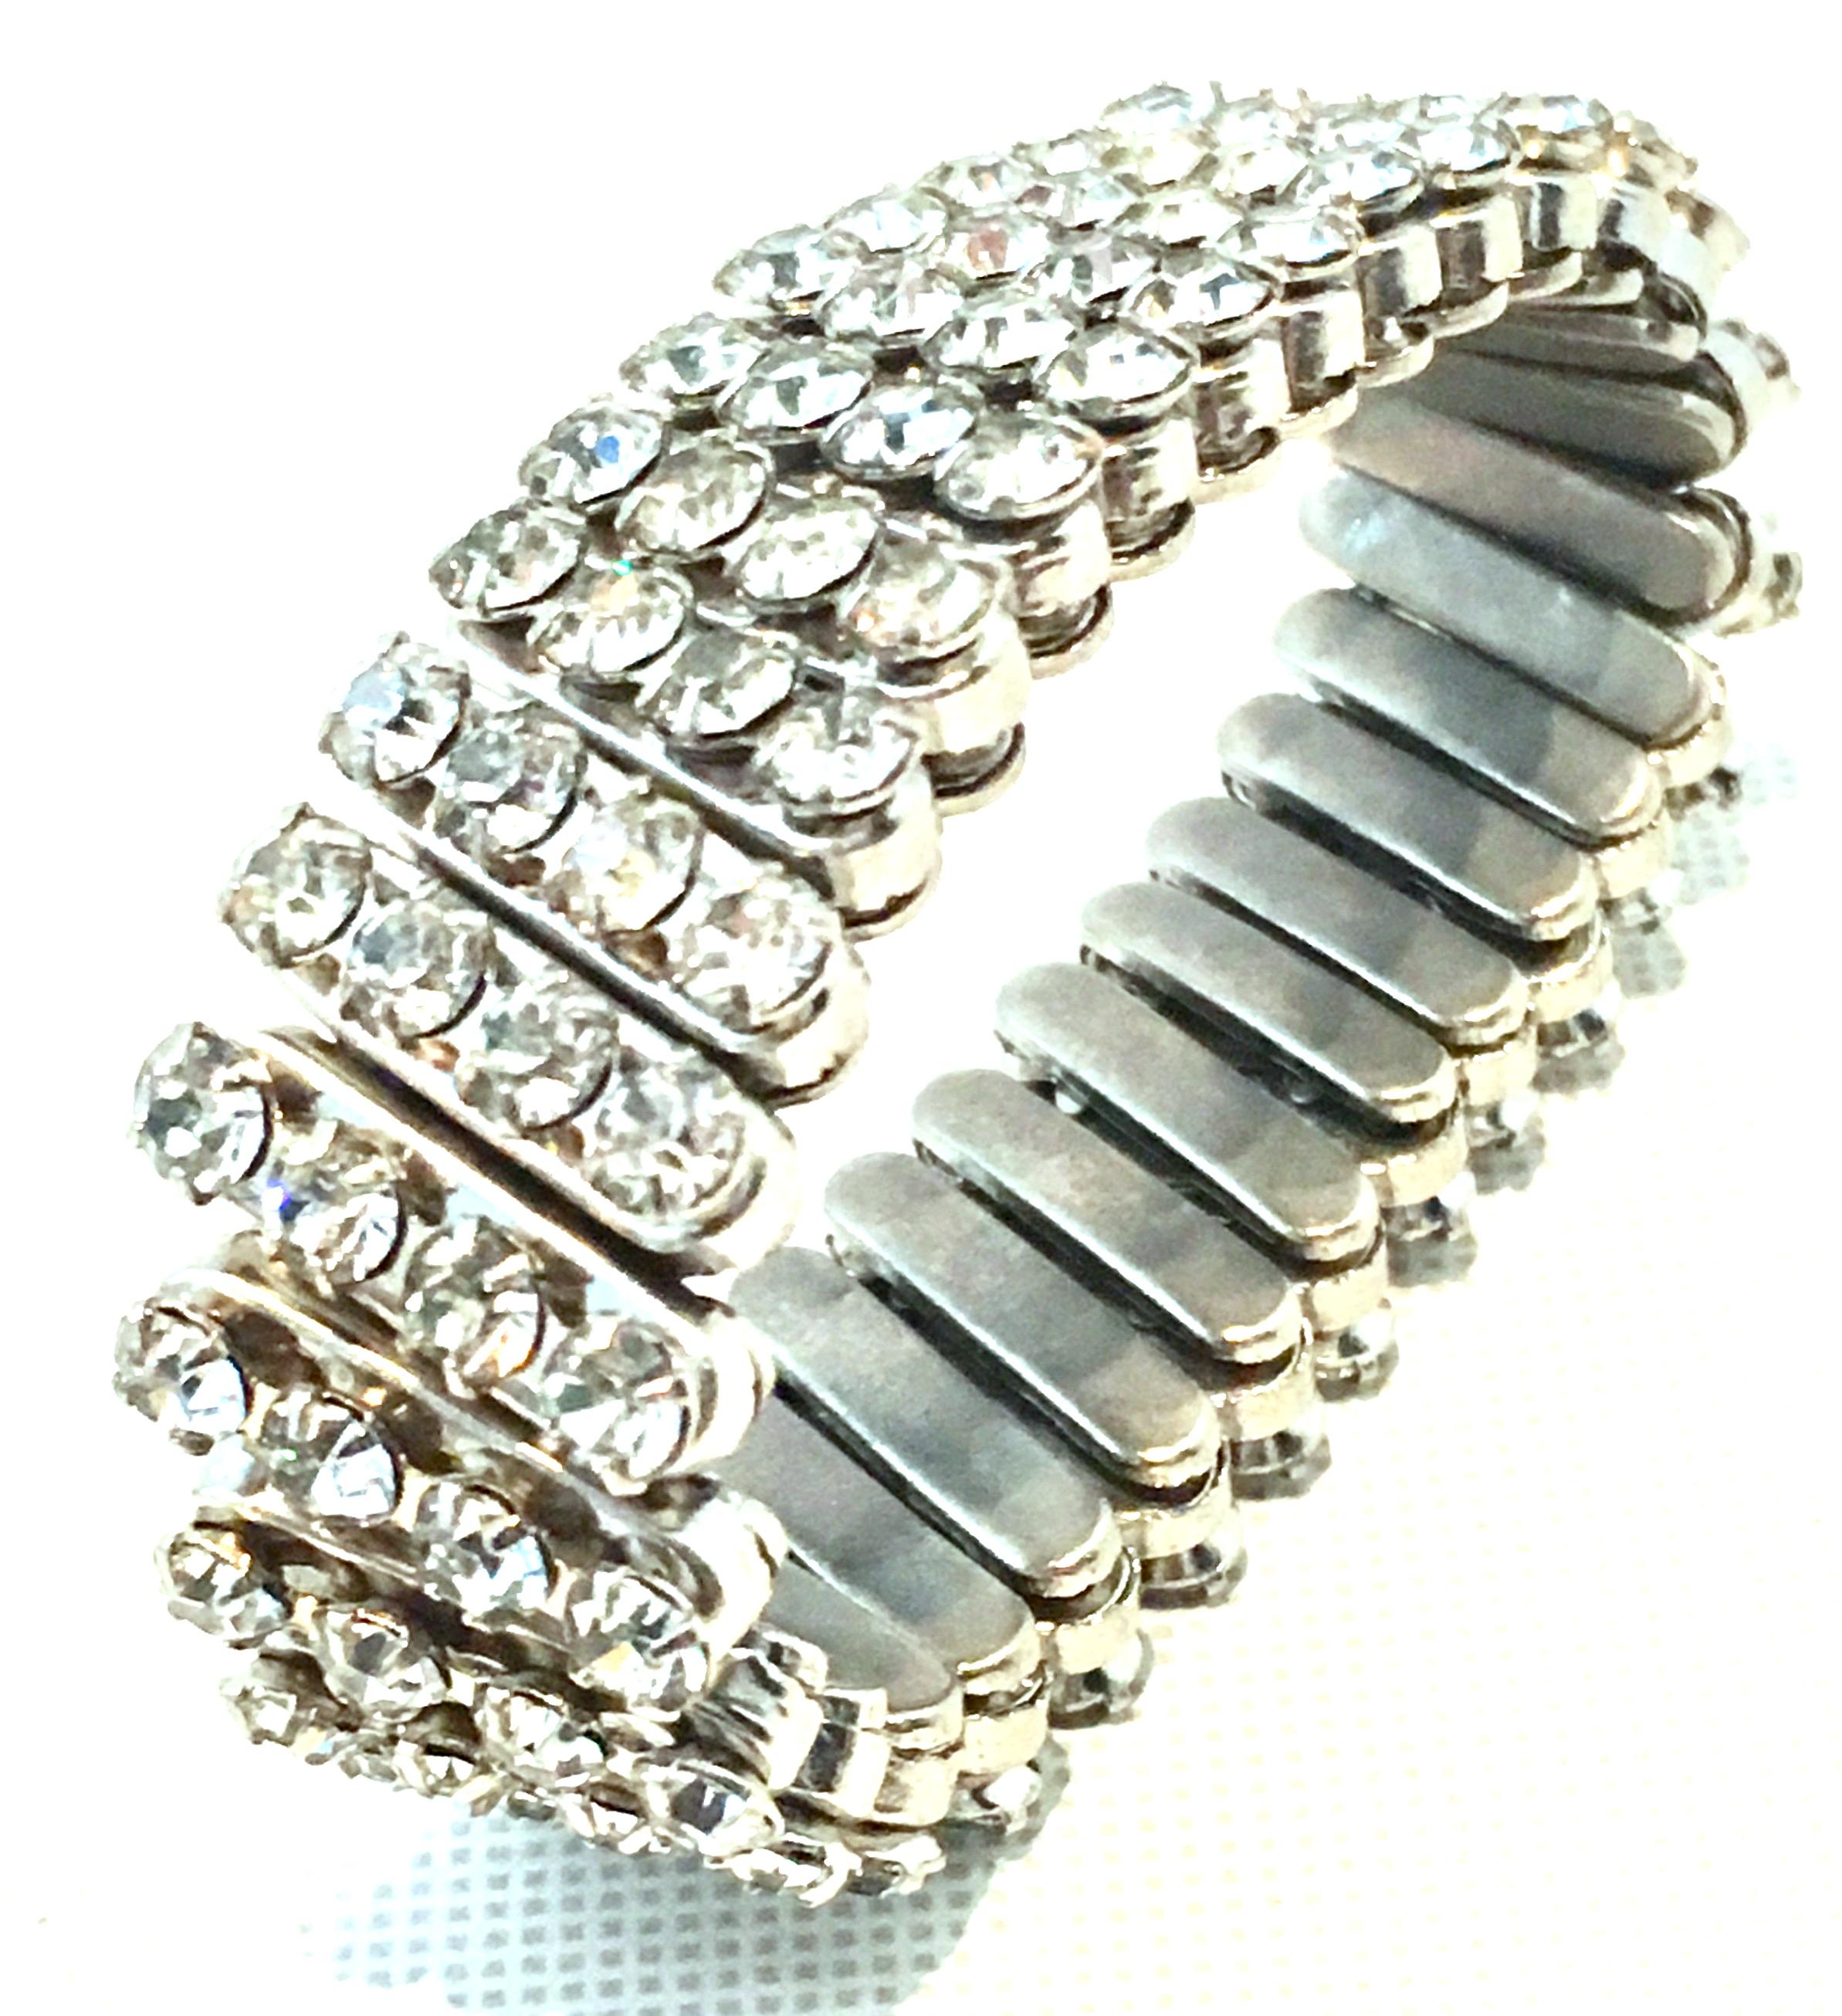 1950'S Silver & Crystal Clear Swarovski Rhinestone Expansion Stretch Link Bracelet.
Fits most wrists. Expands to approximately 3.5